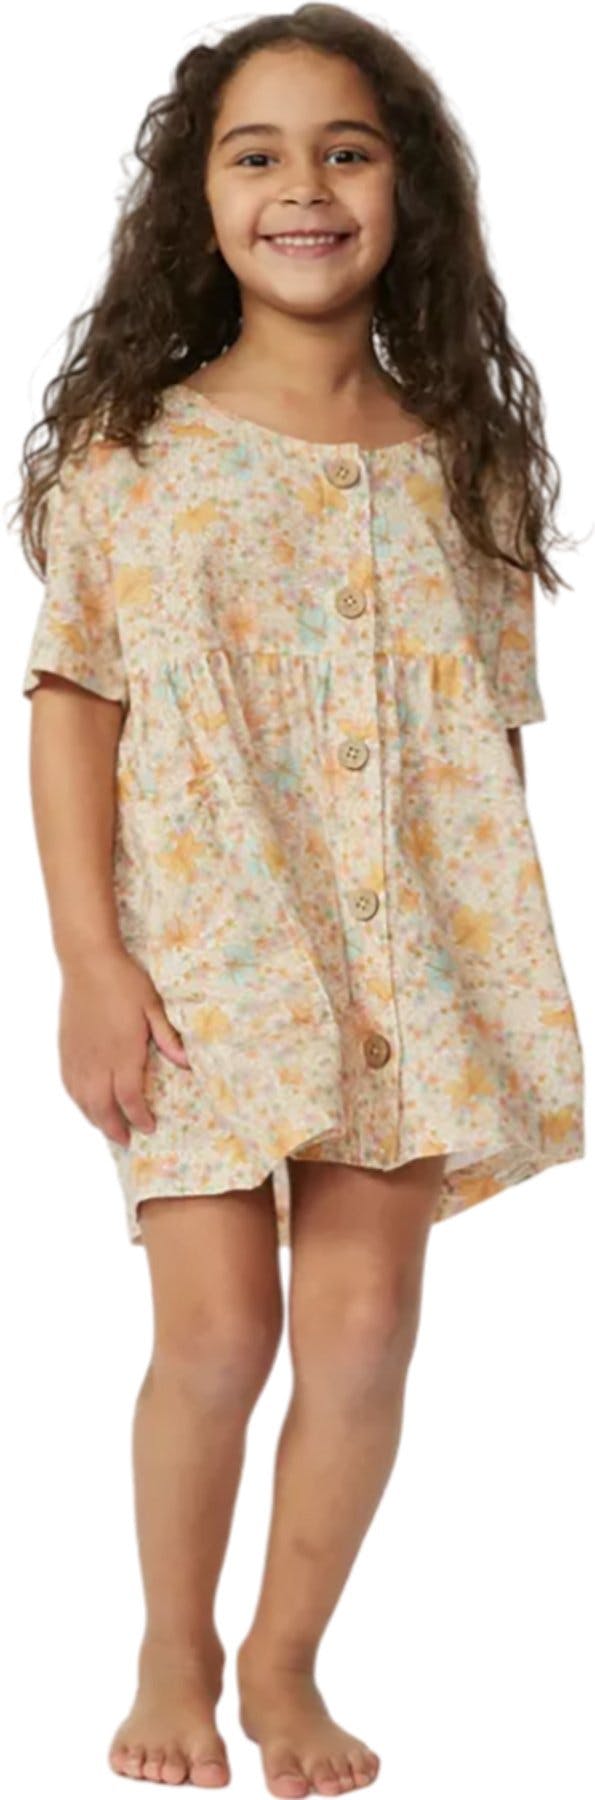 Product image for Crystal Cove Dress - Girls